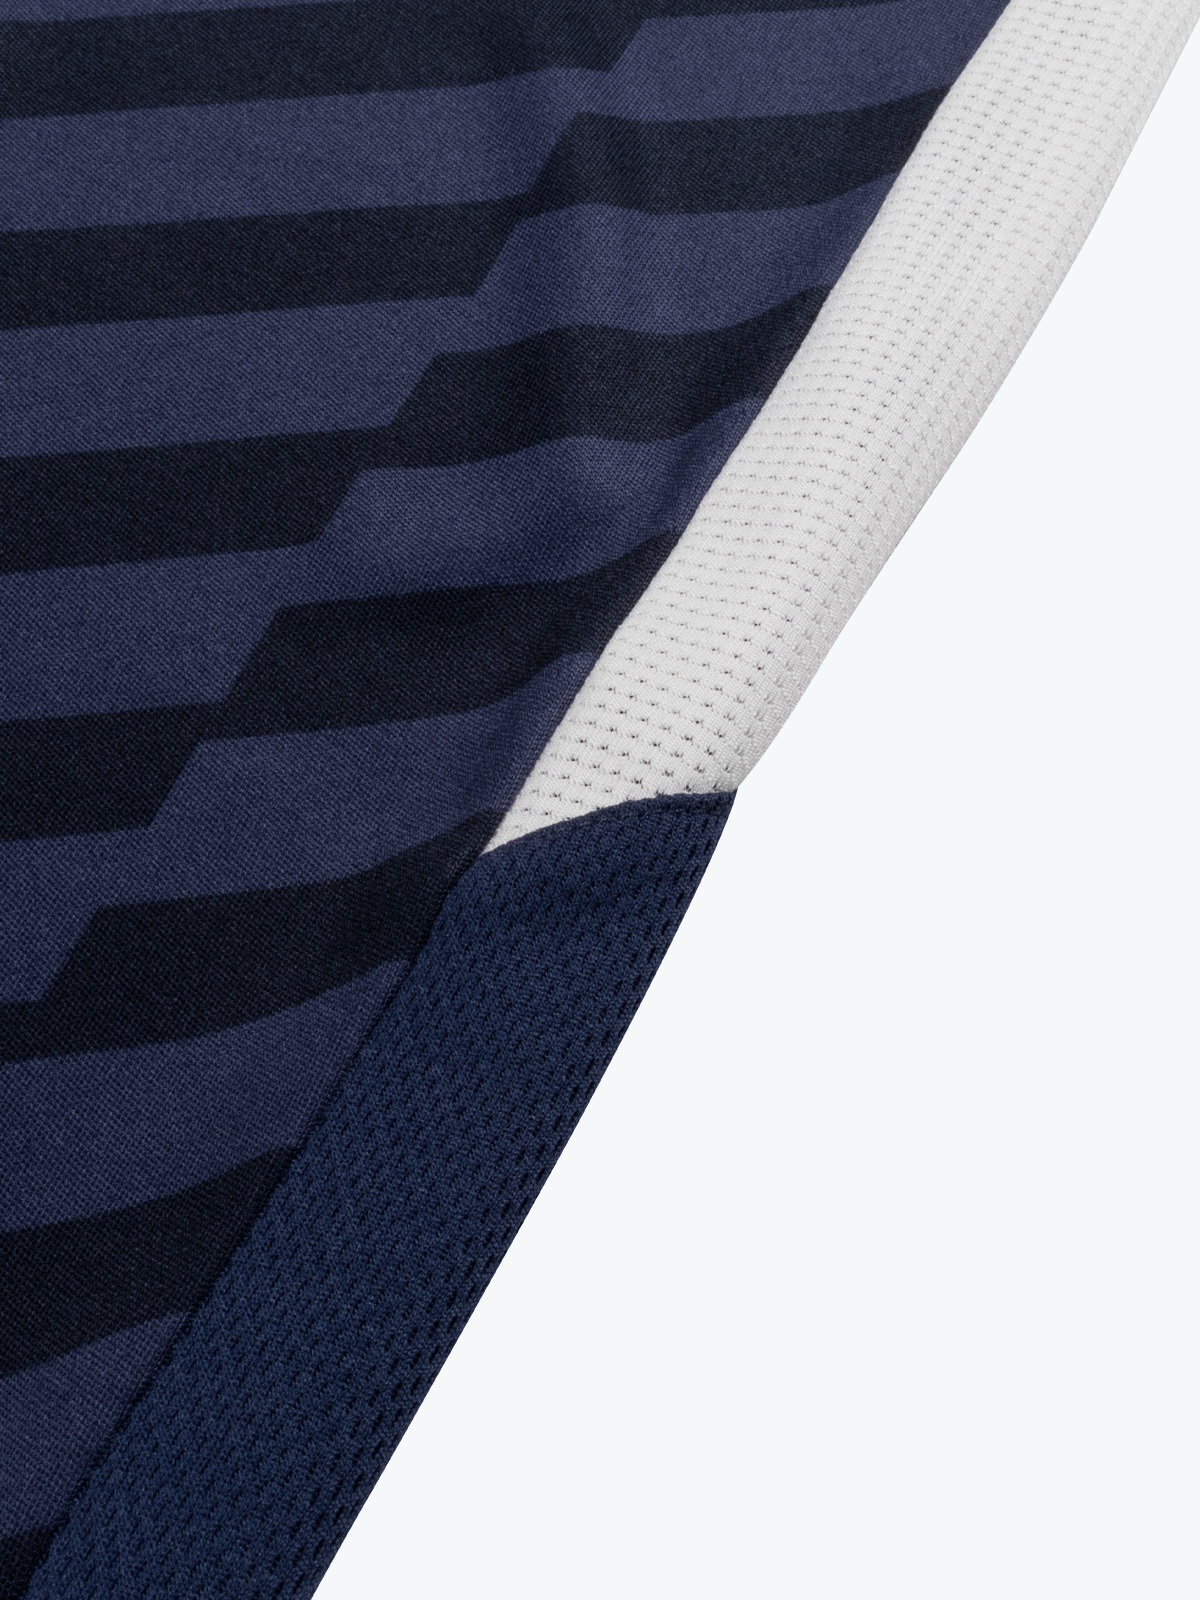 picture of evolve pro 3 jersey - navy